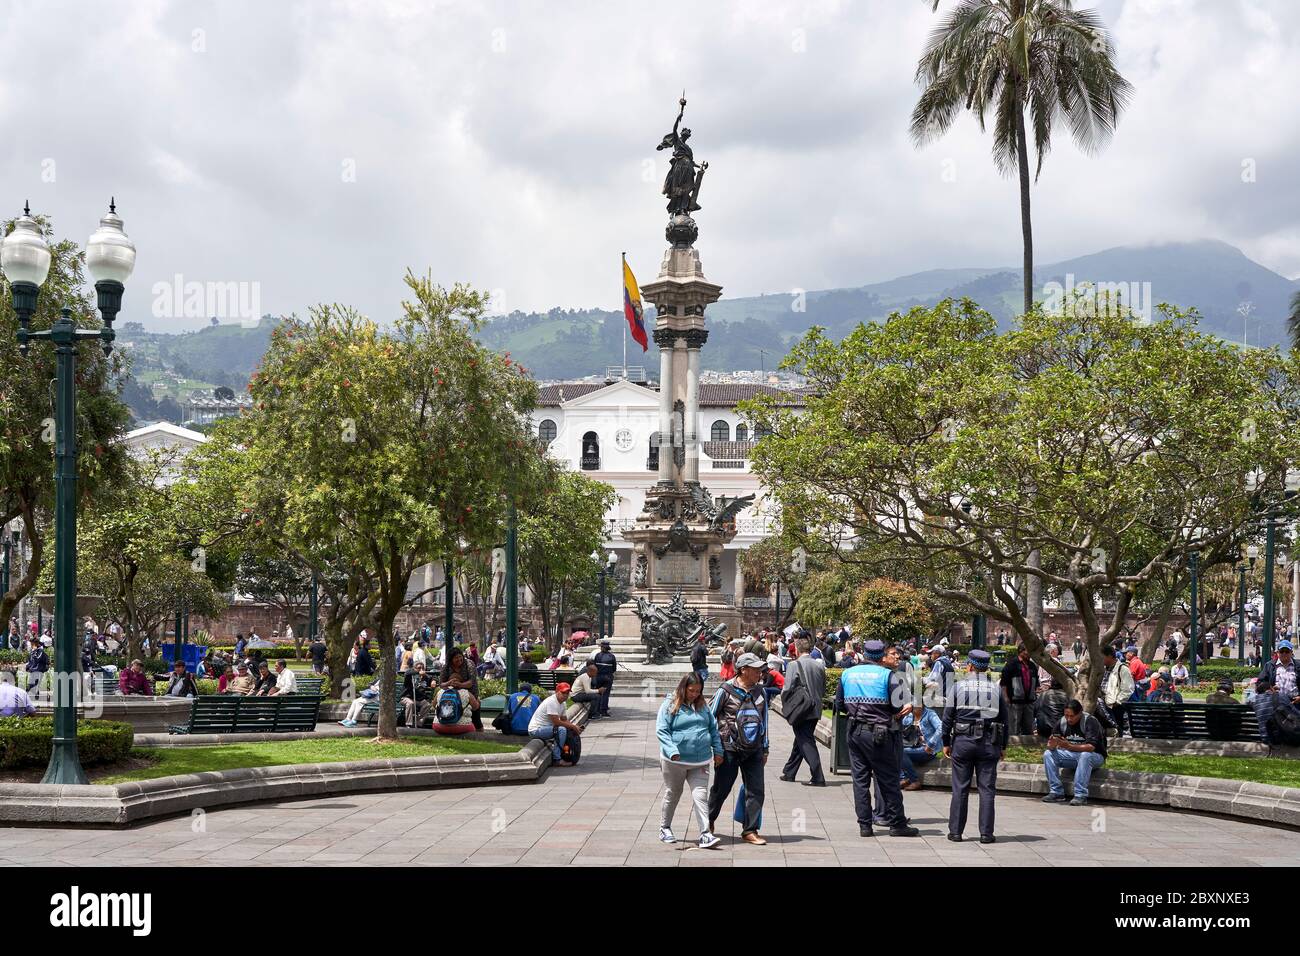 Statue of Liberty in Independence Square, Quito, Ecuador Stock Photo